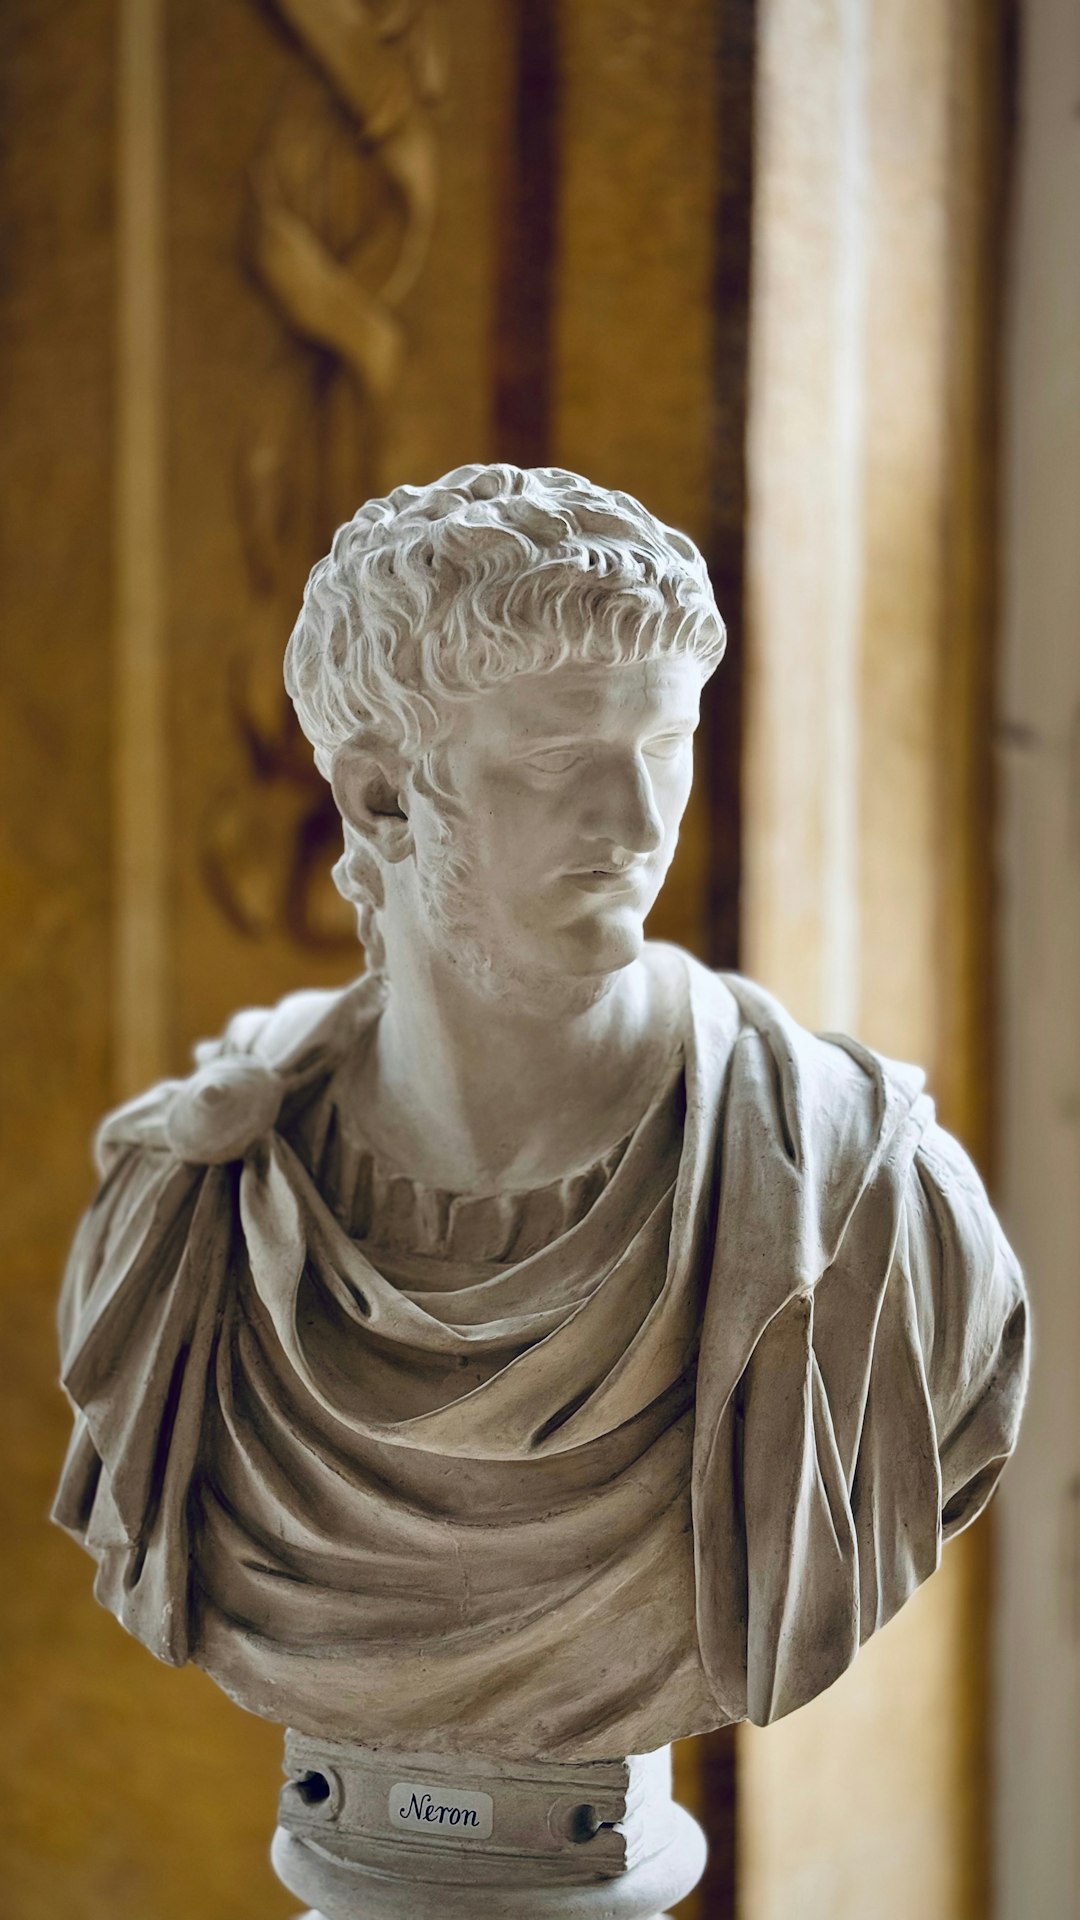 A Marble Bust of the Ancient Roman Emperor Nero